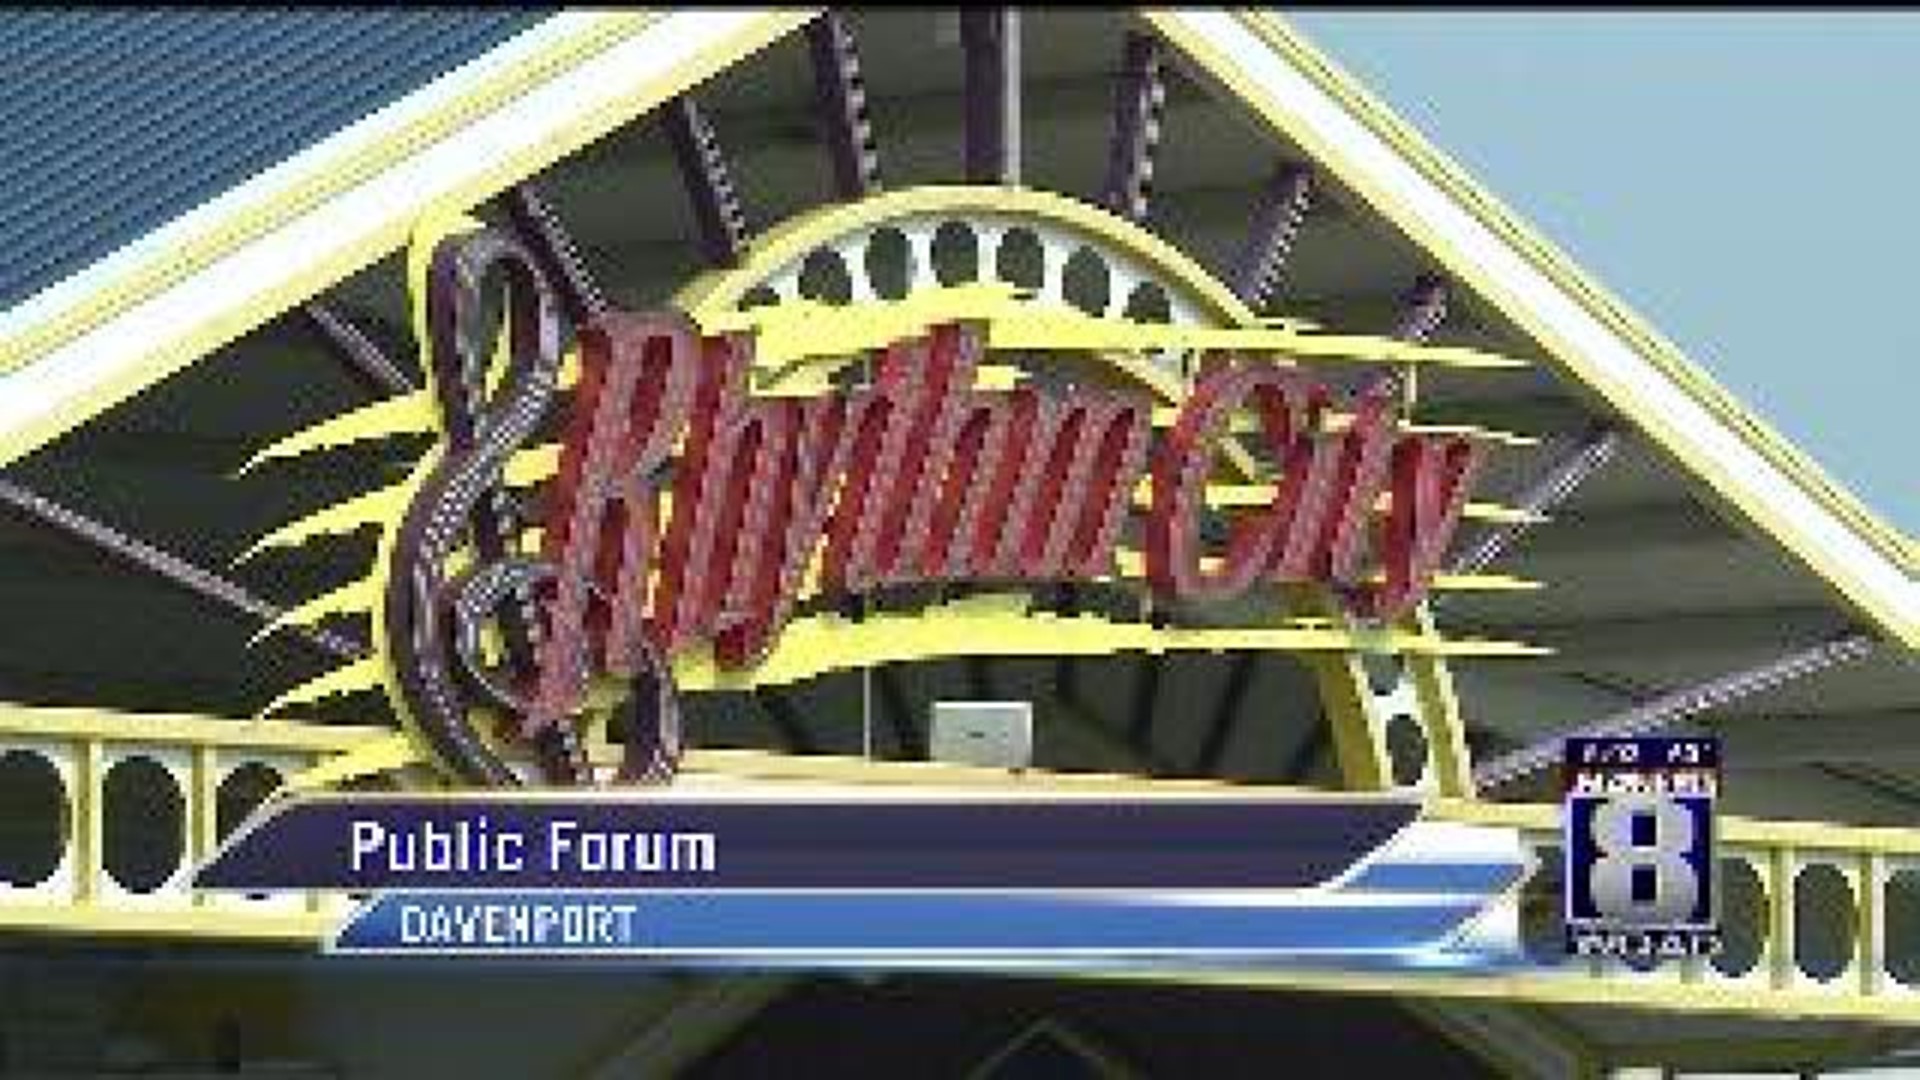 City-wide forum held to discuss casino purchase in Davenport